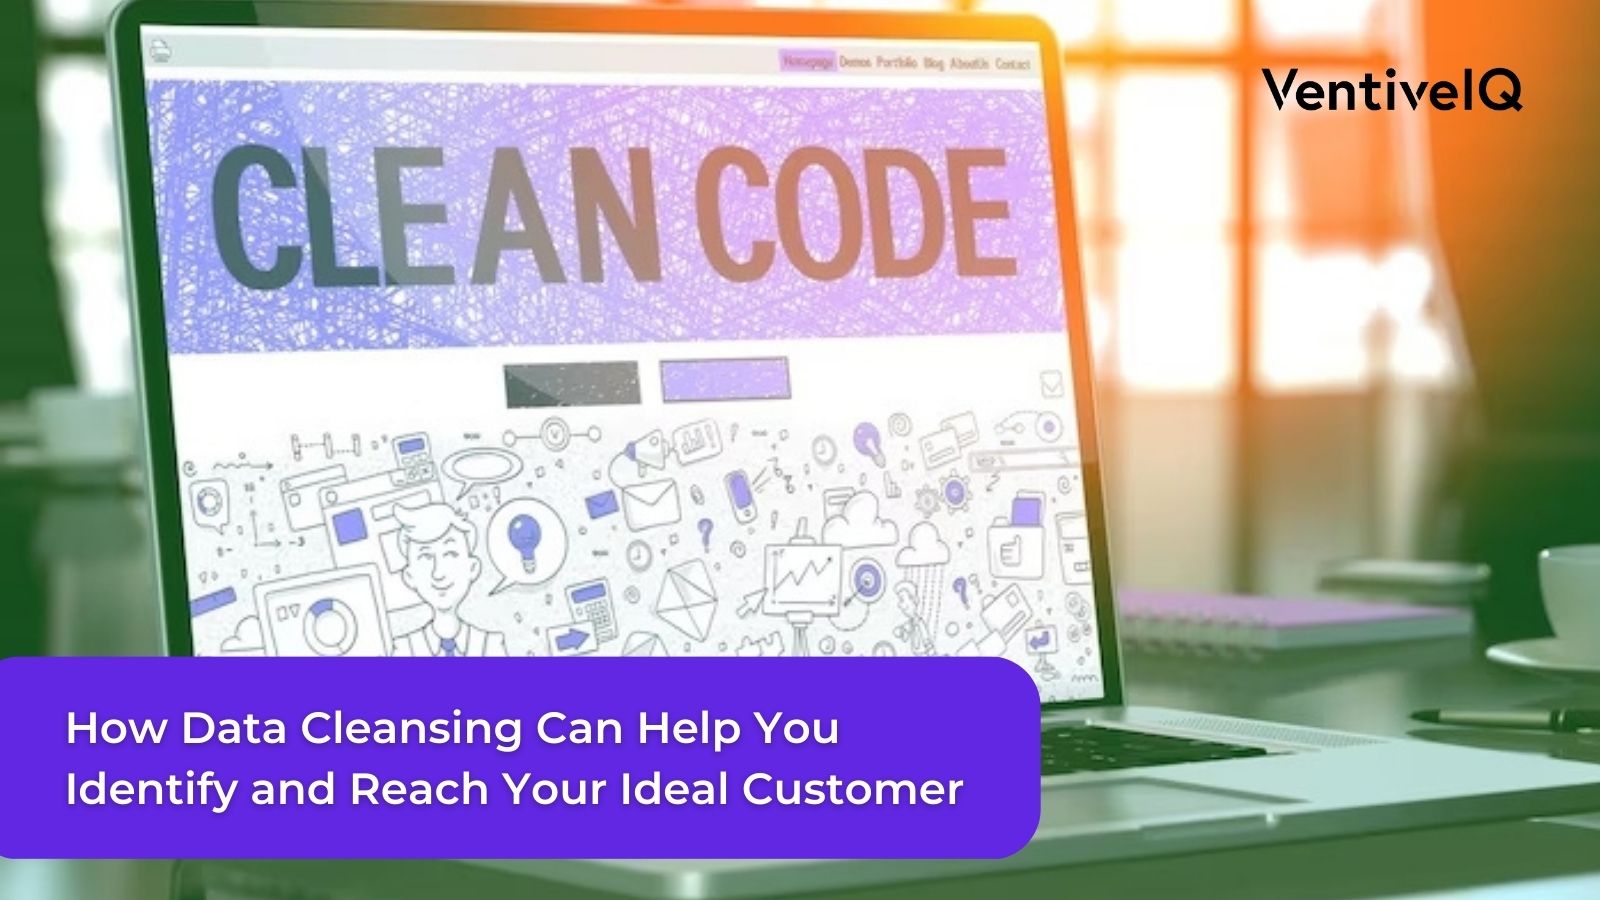 How Data Cleansing Can Help You Identify and Reach Your Ideal Customer